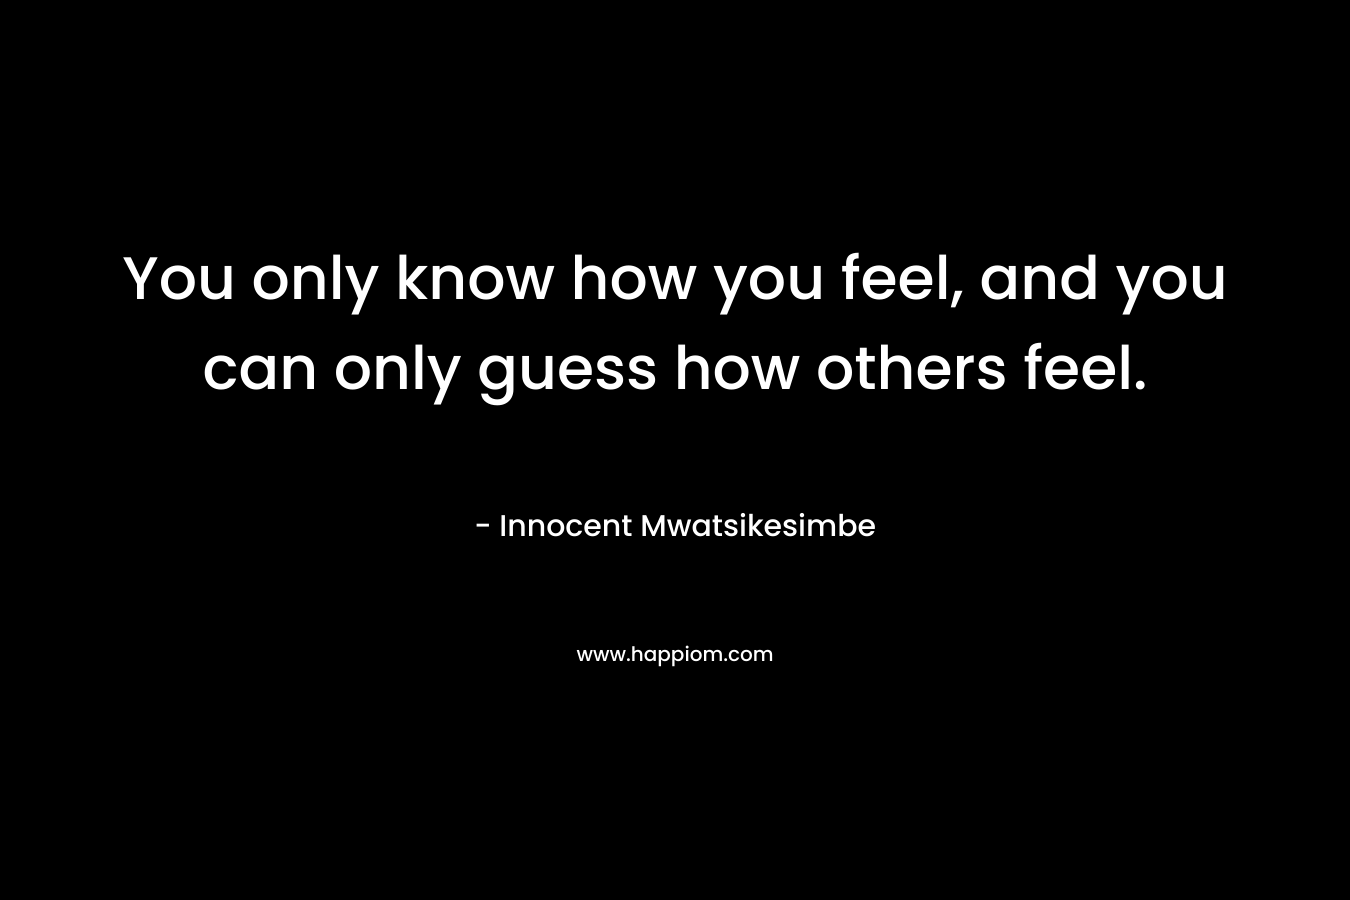 You only know how you feel, and you can only guess how others feel.